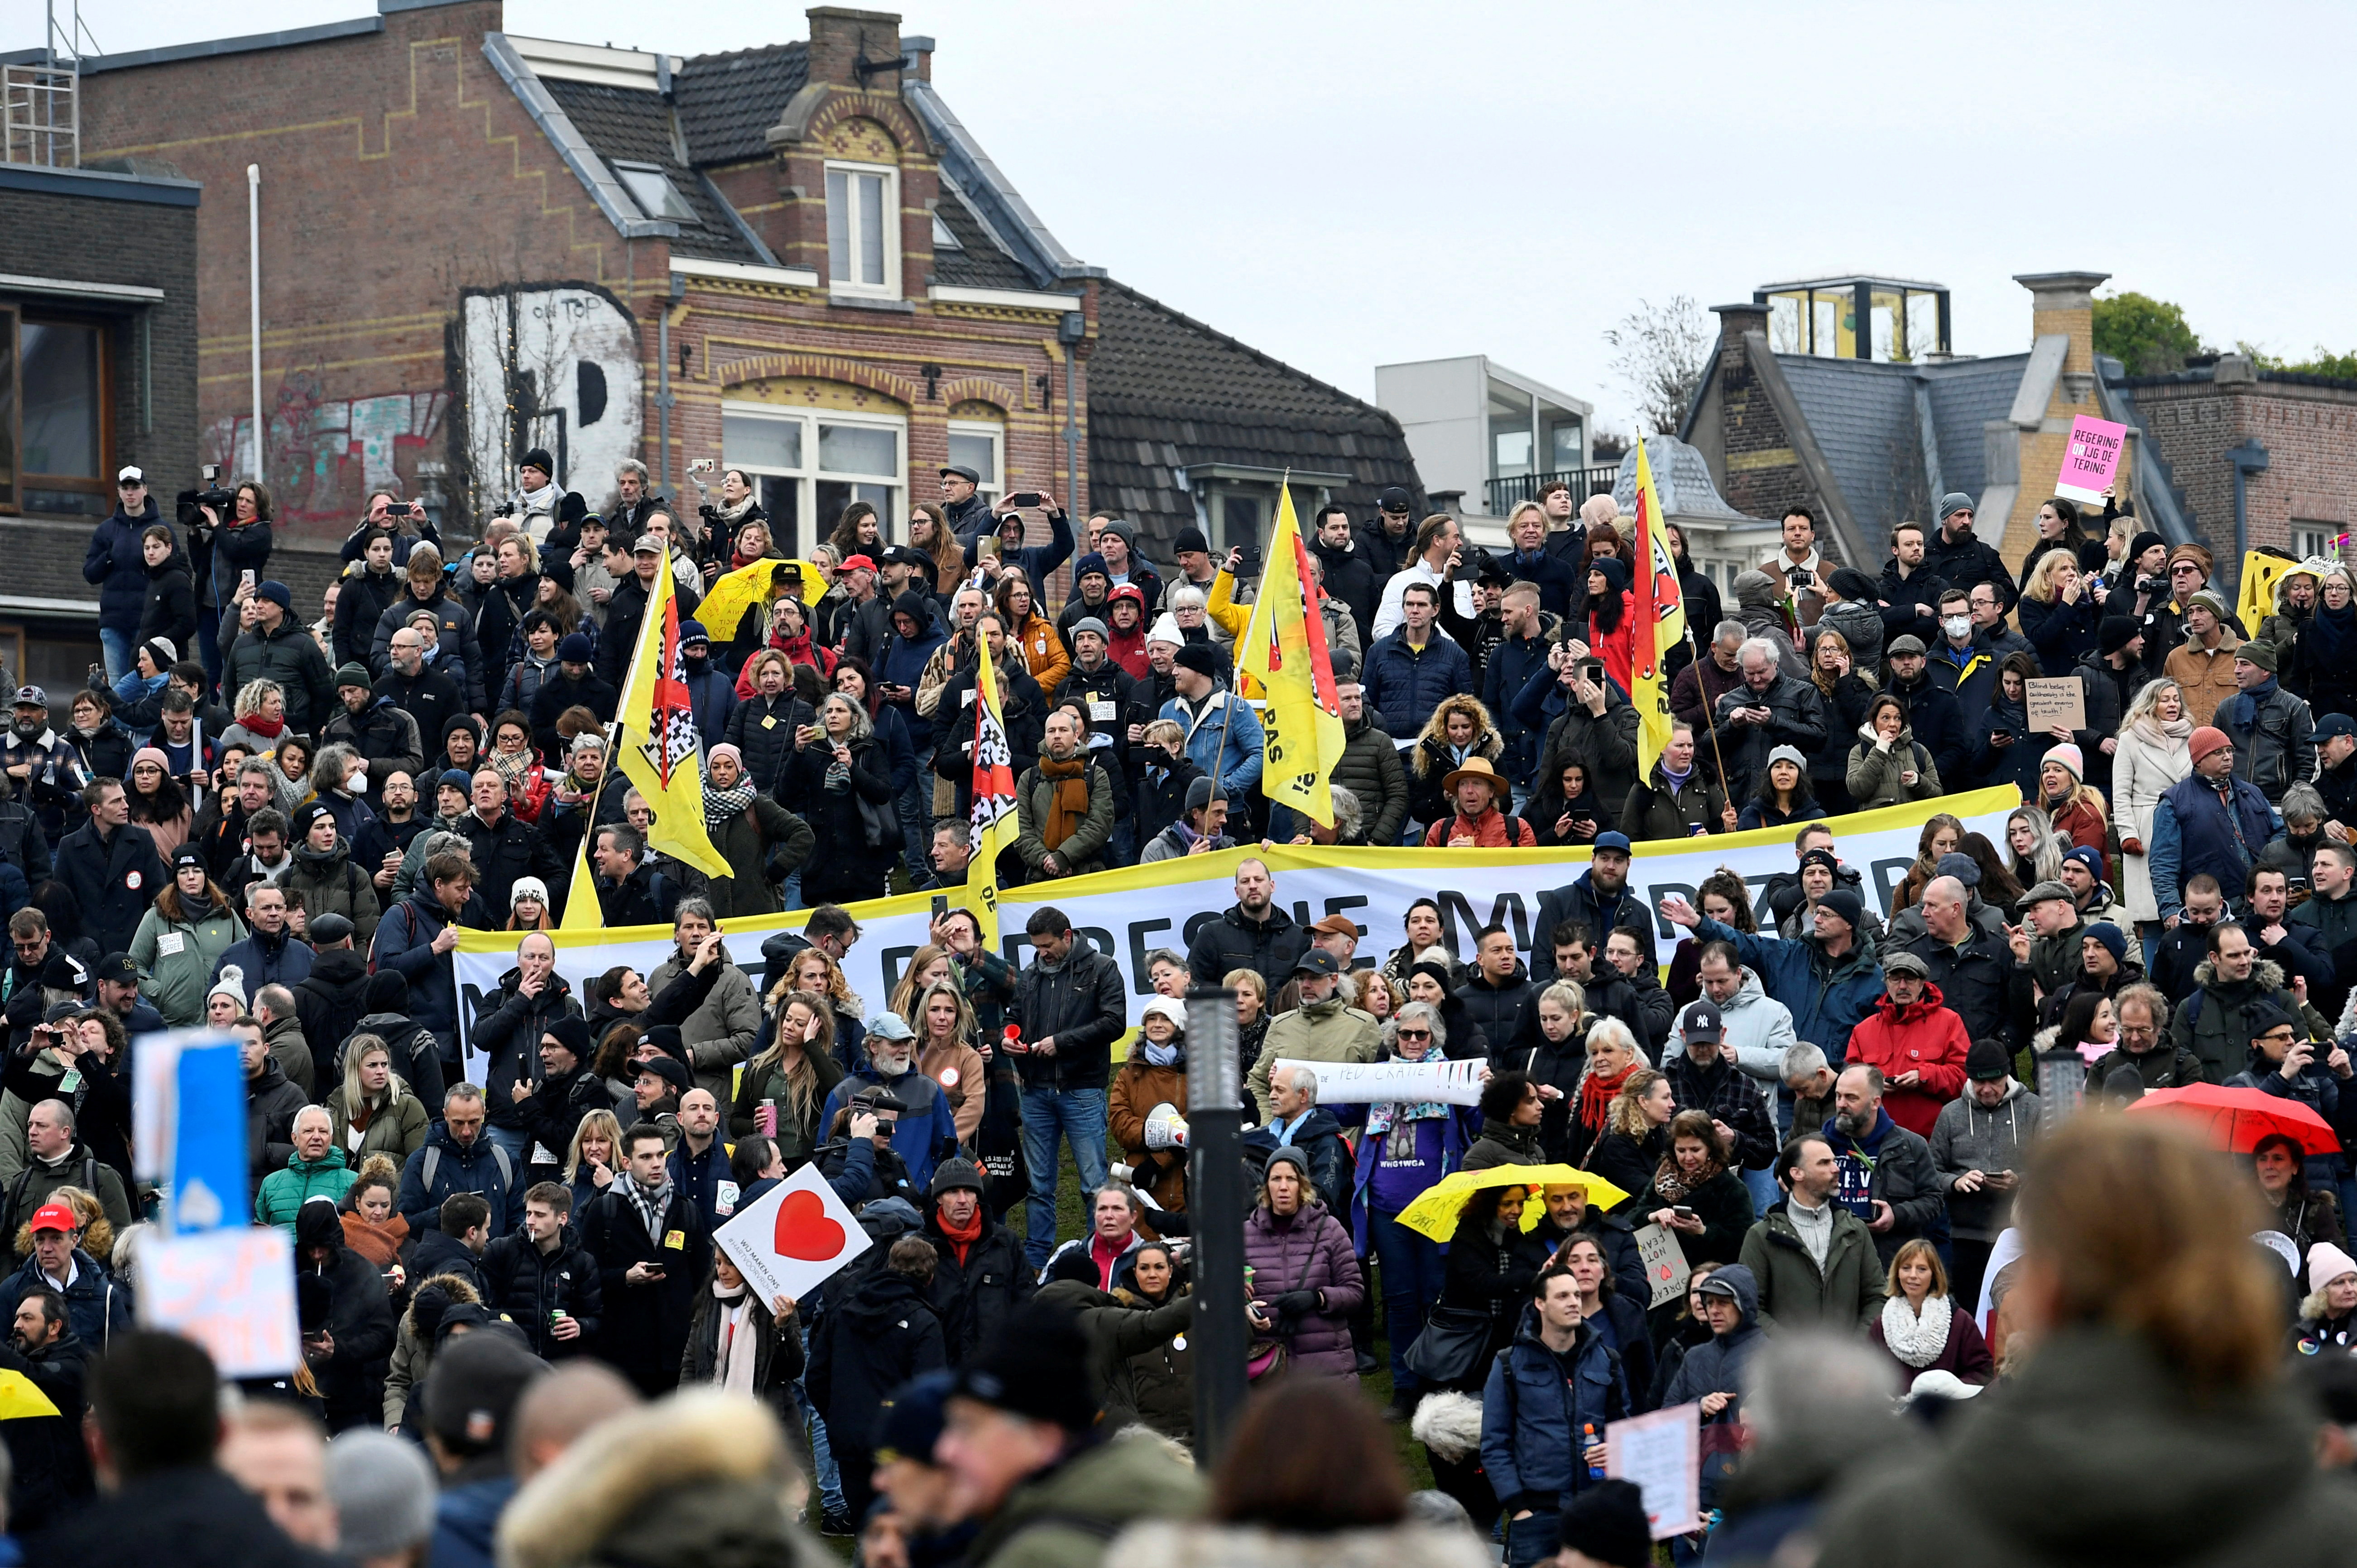 Demonstration against COVID-19 restrictions in Amsterdam